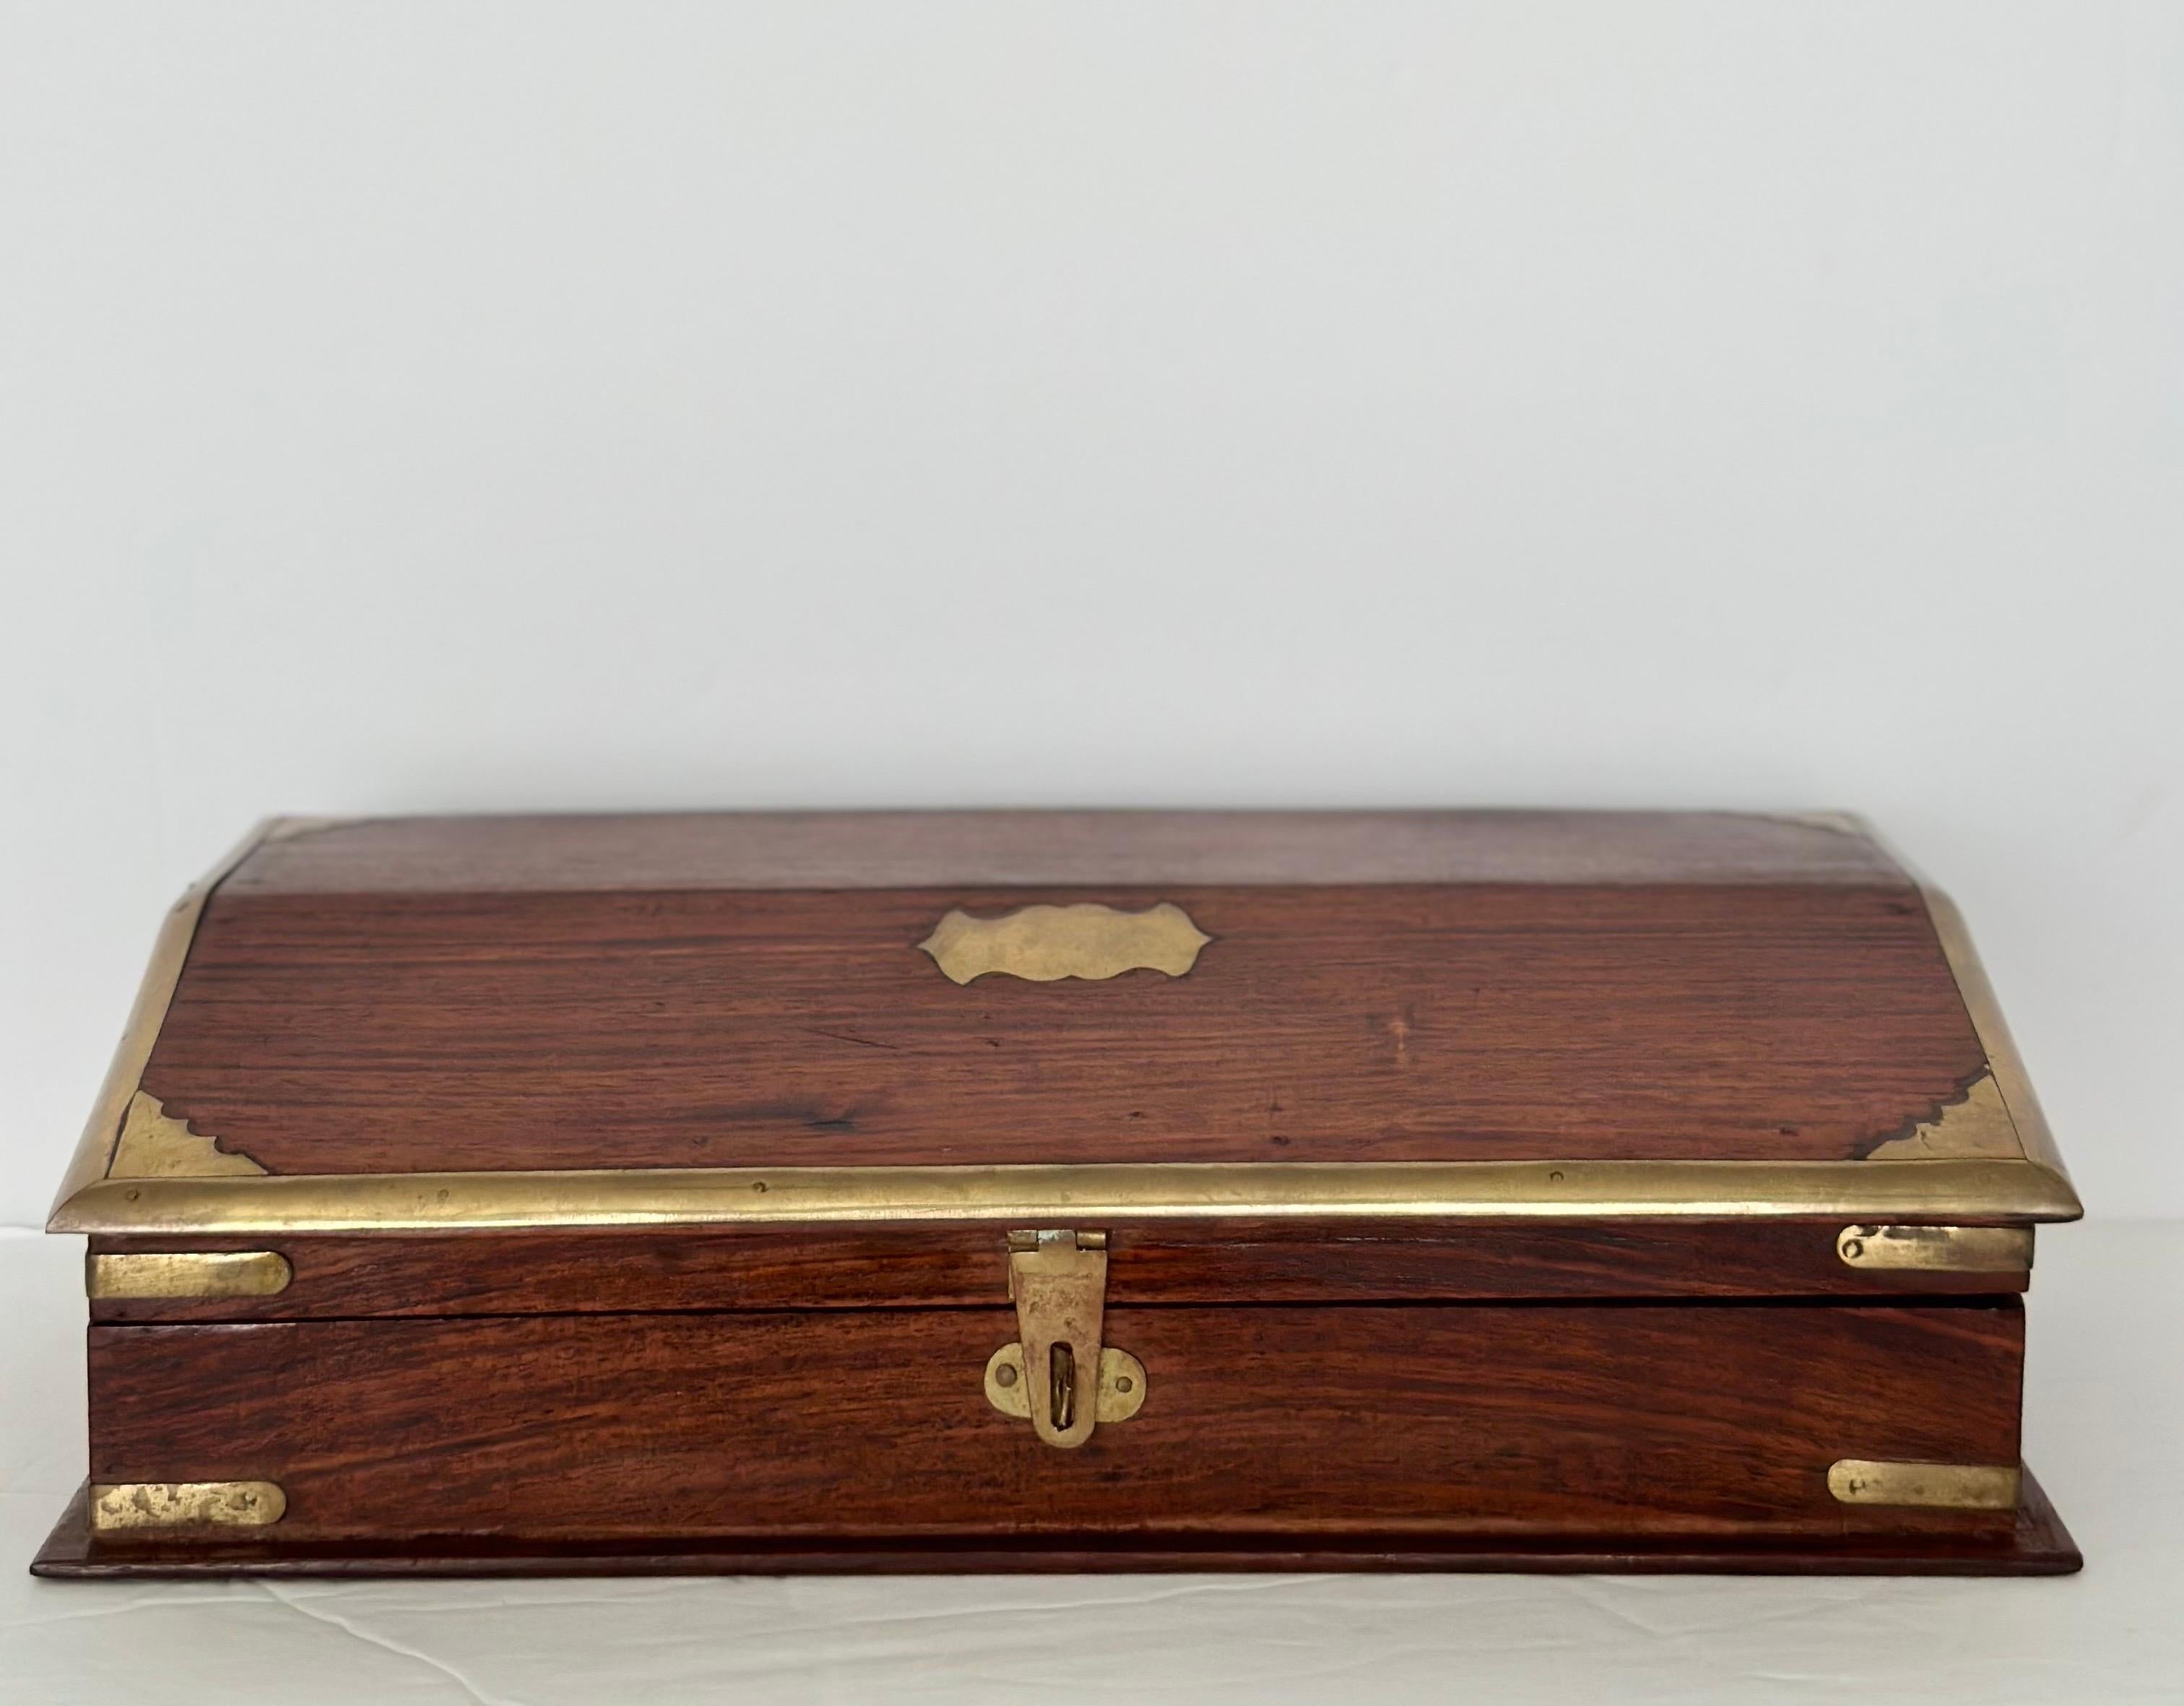 We are very pleased to offer a timeless campaign-style wood box, gracefully adorned with brass inlays, circa the 1950s.  The exterior of the box reveals the natural beauty of the wood, contrasted beautifully with the intricate brass designs that are